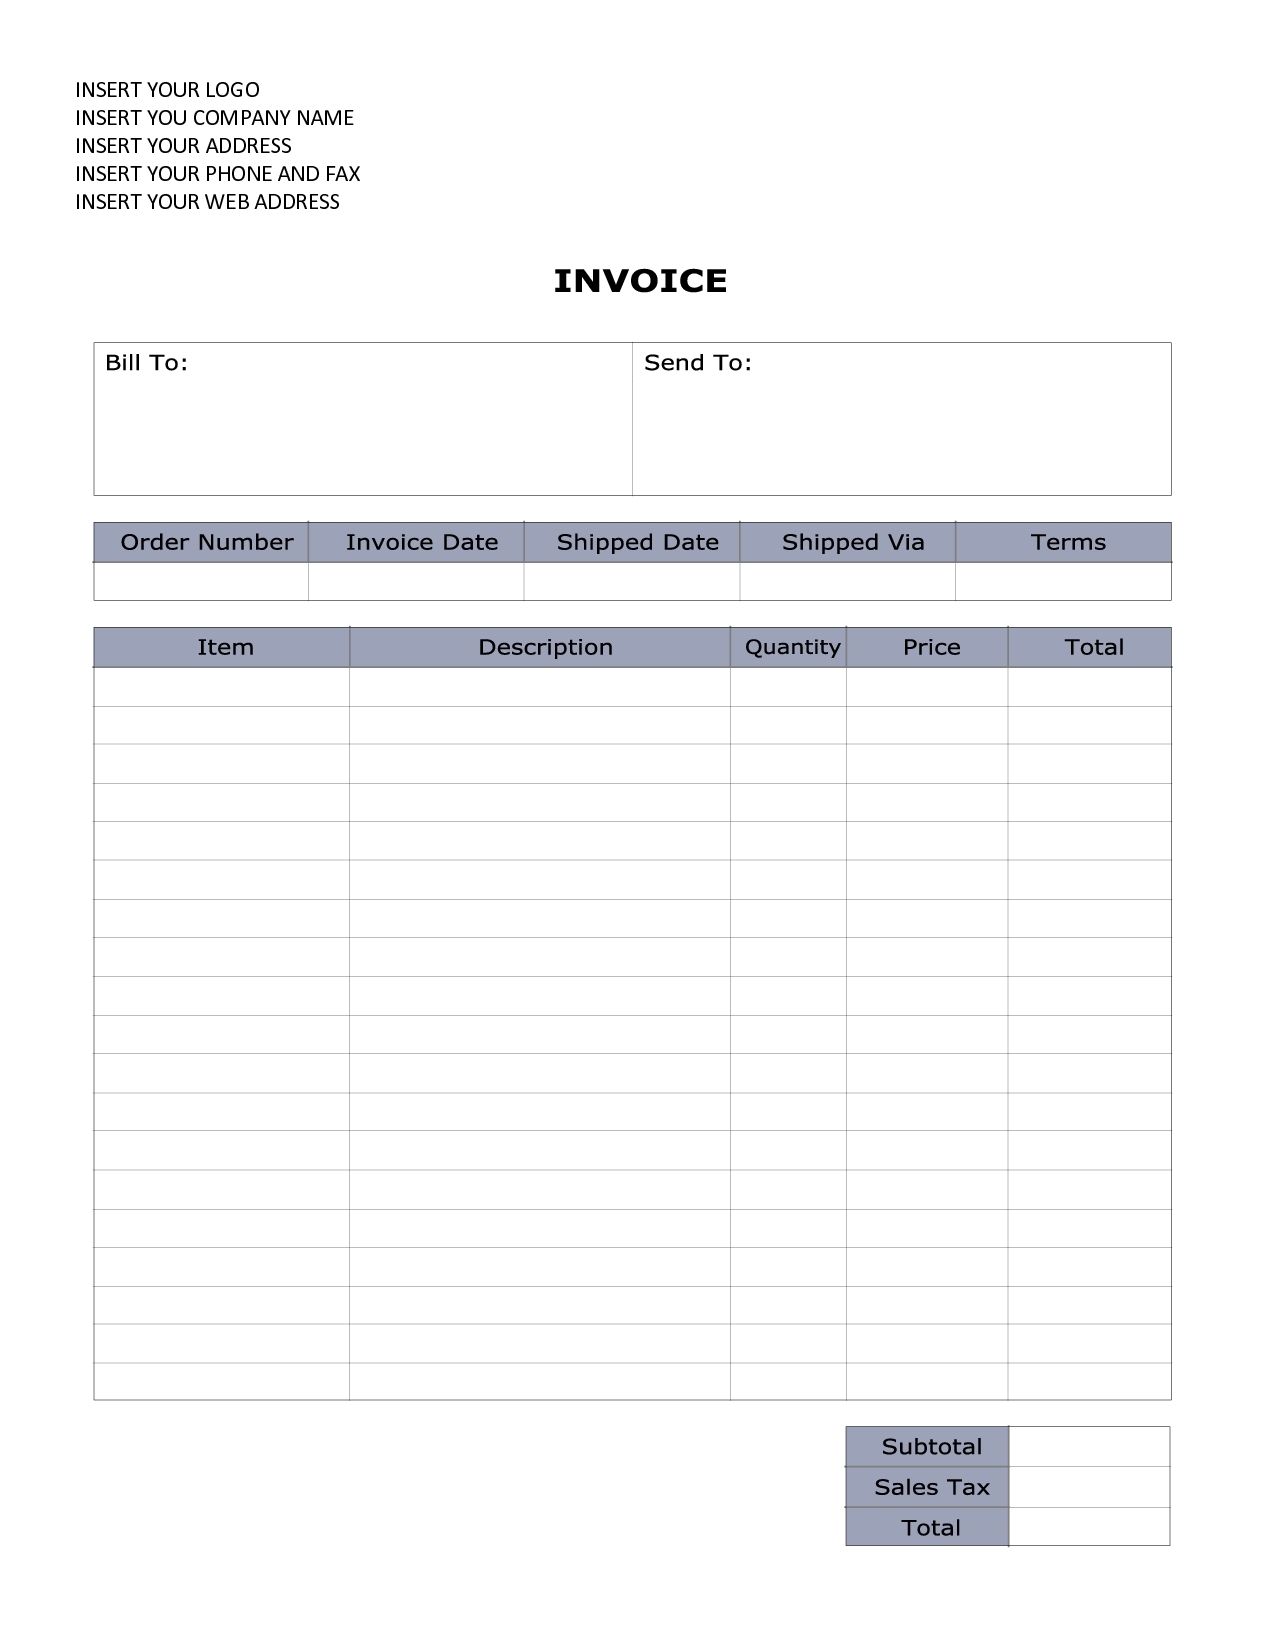 invoice template word invoice template free 2016 invoice examples in word